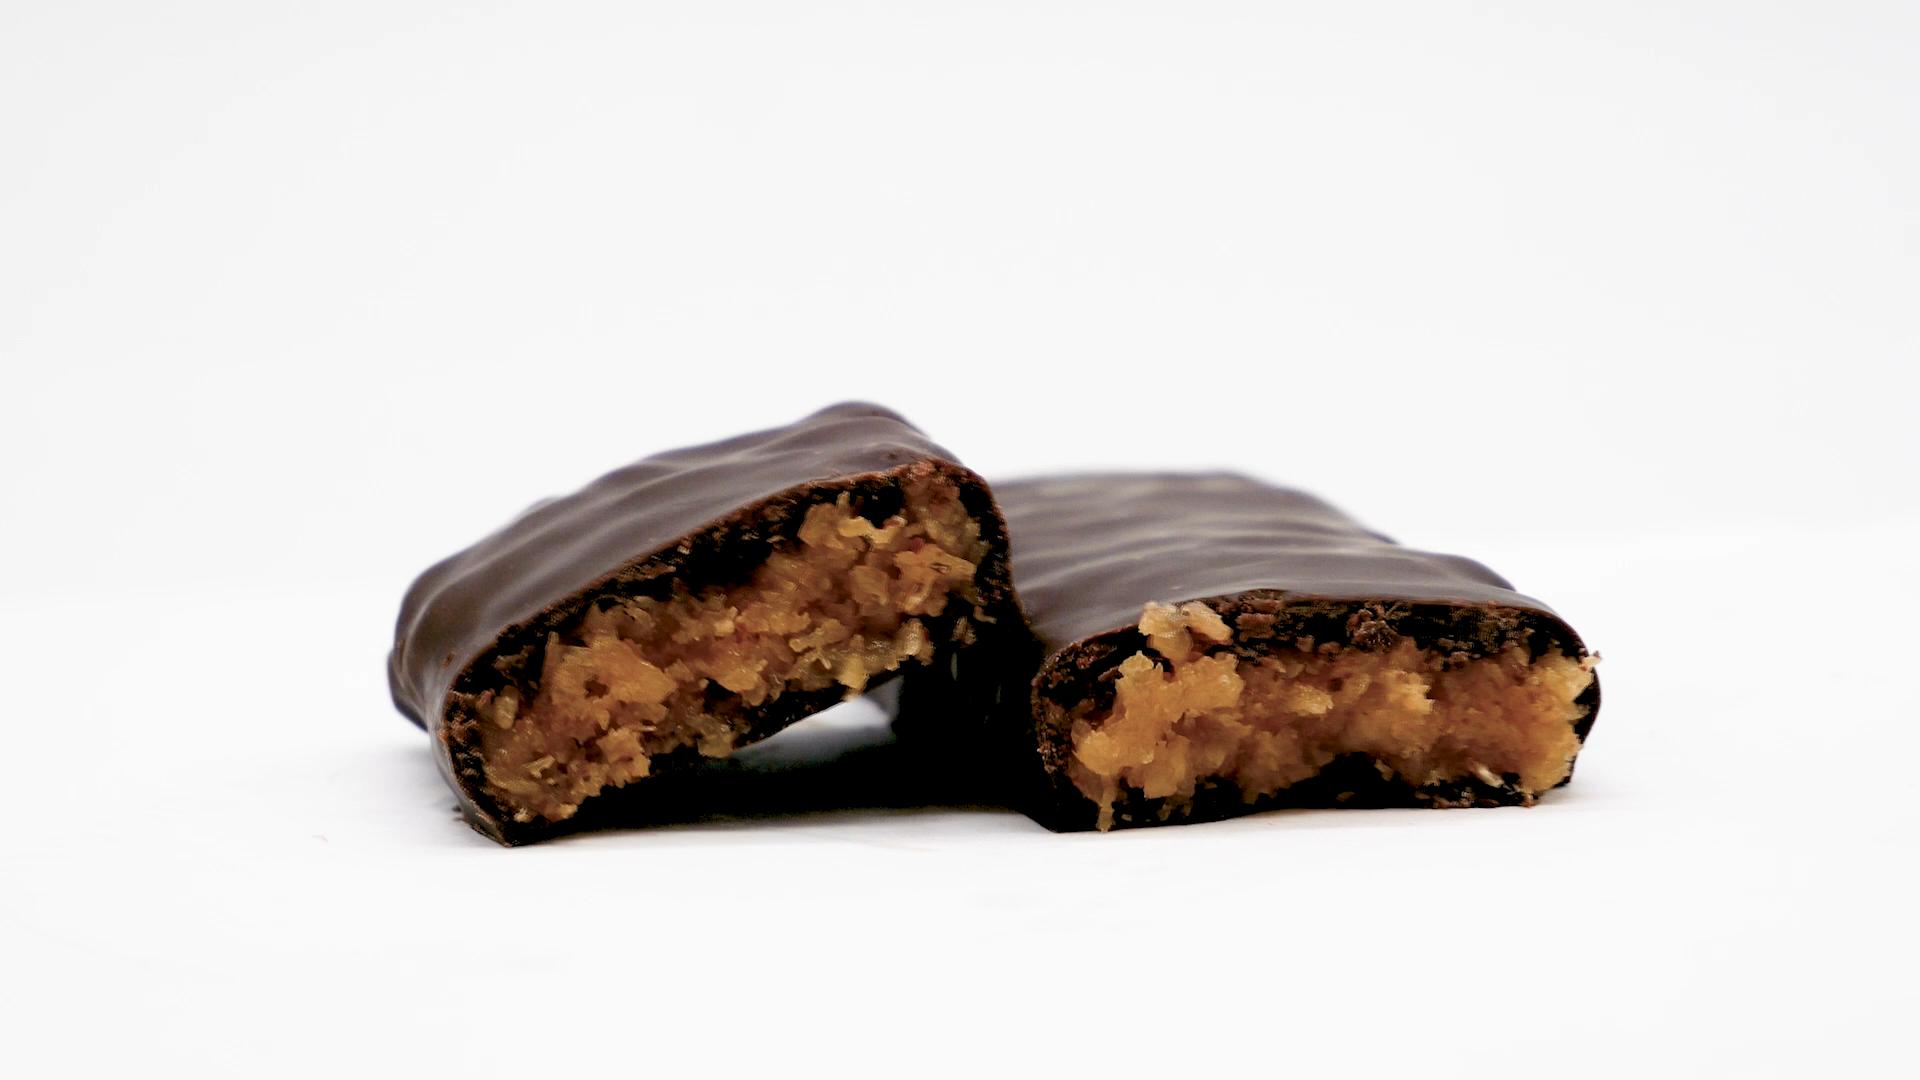 Nutritional Functional Food bars with chocolate and coconut